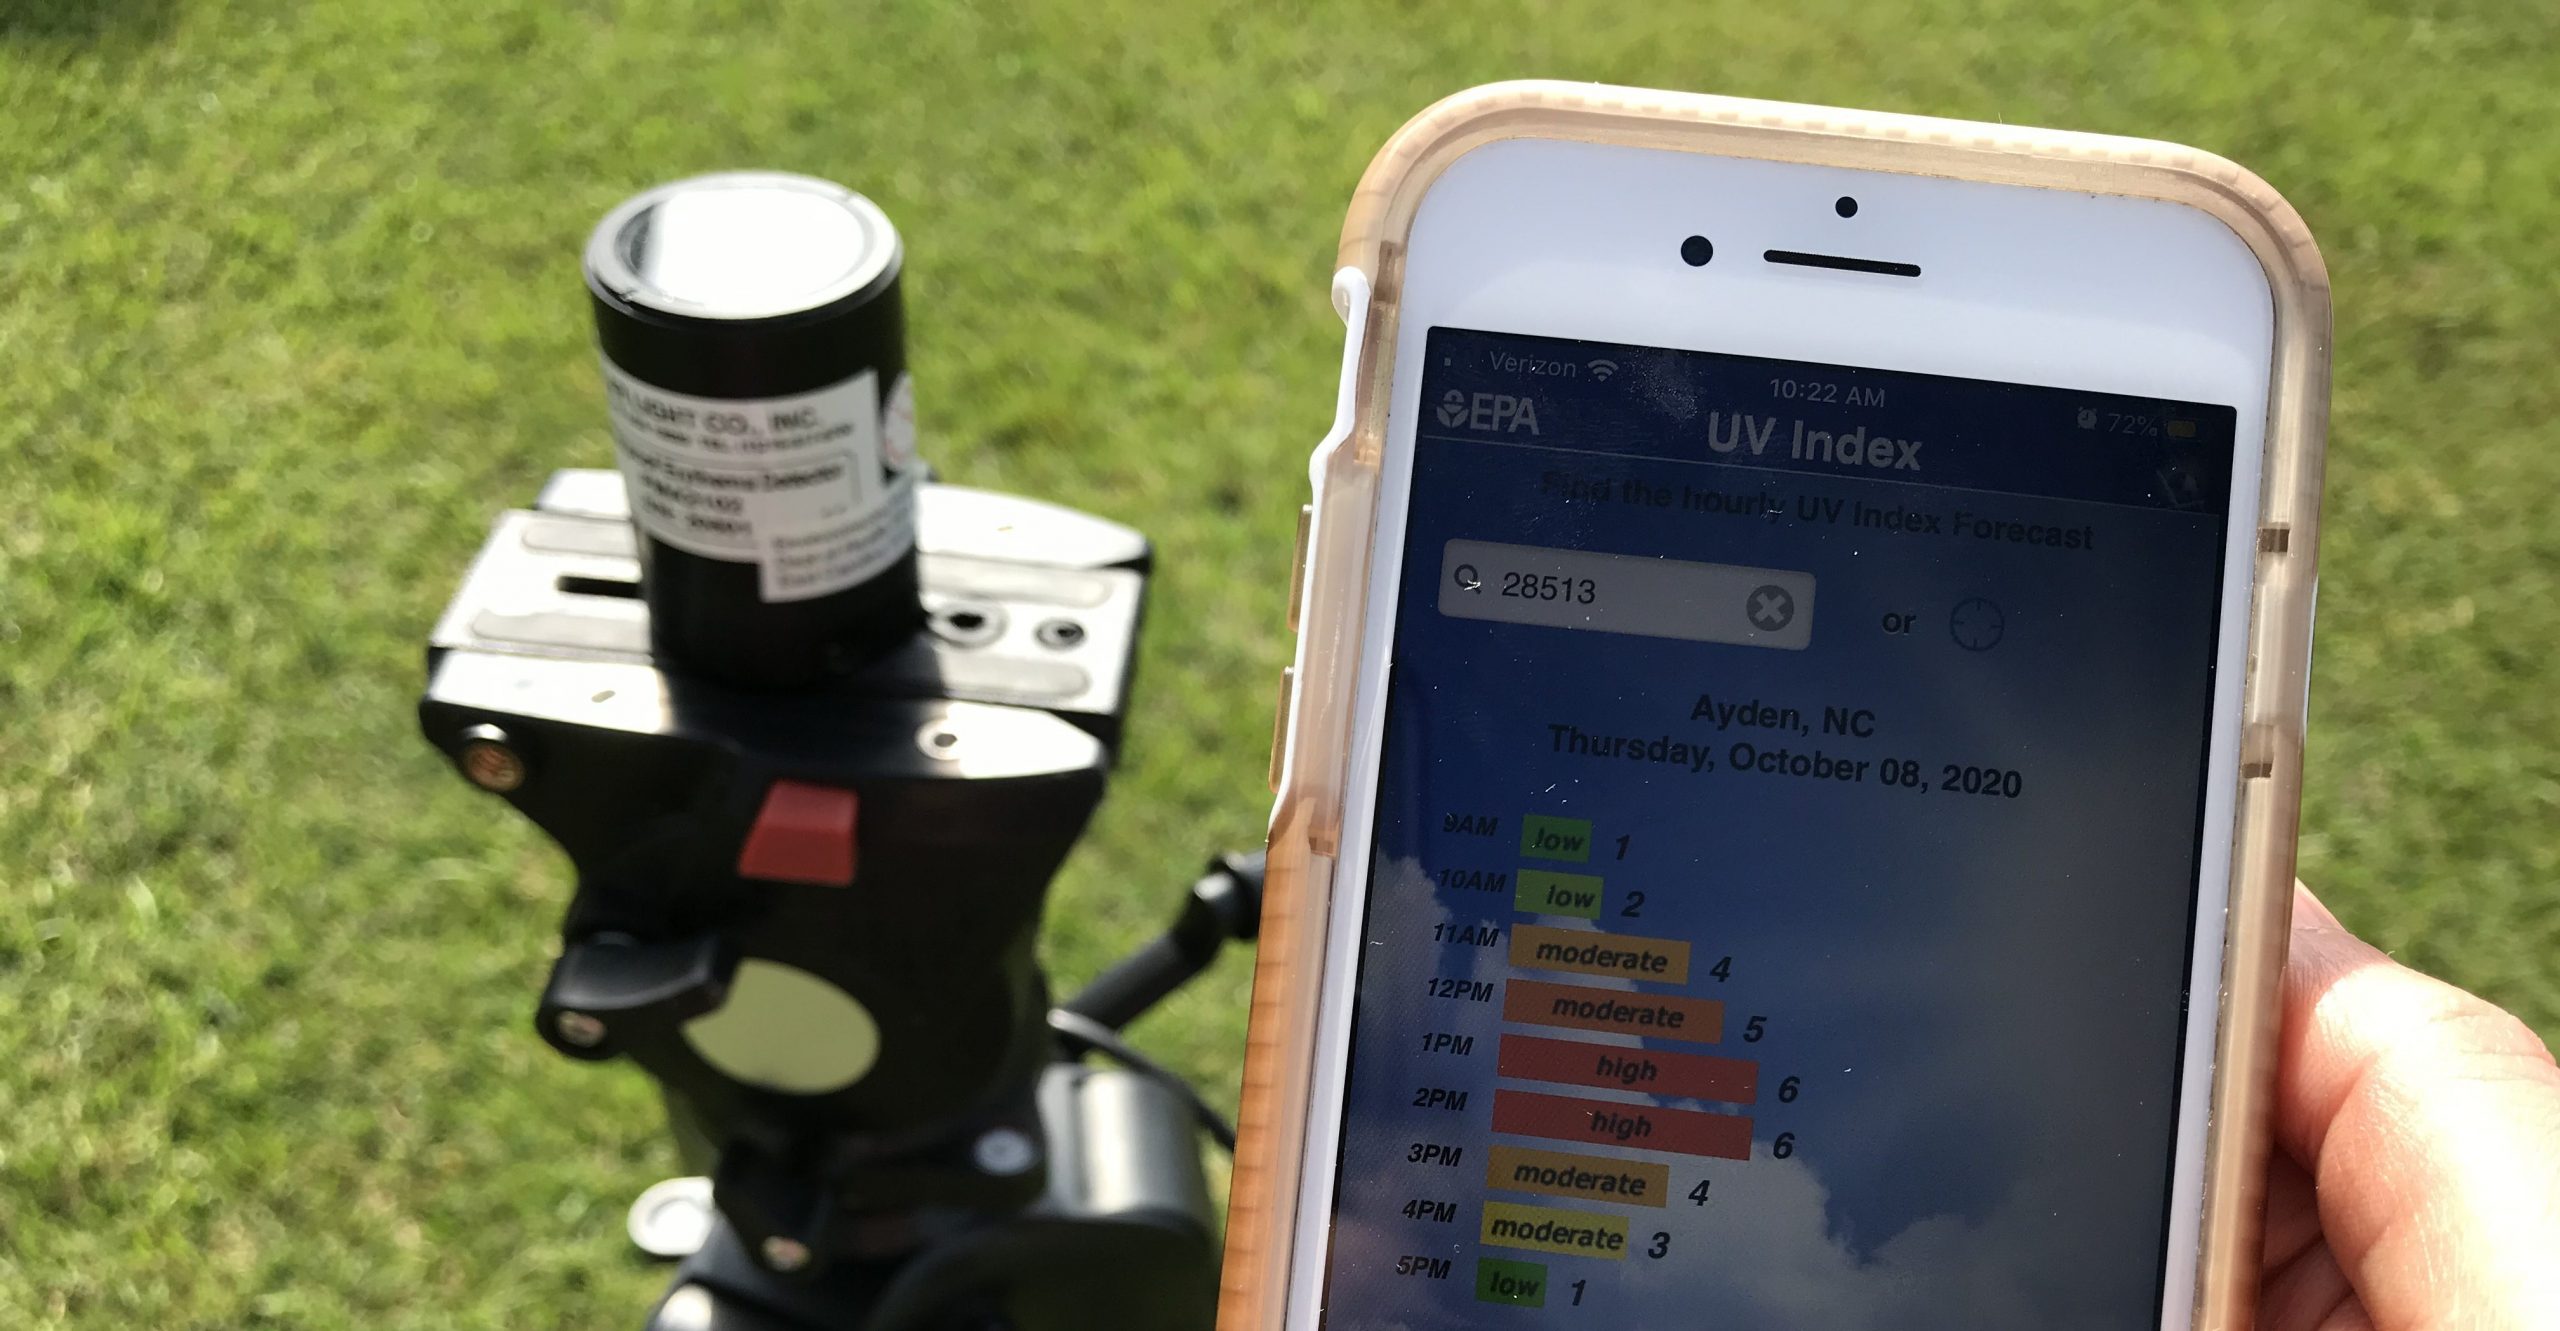 You are currently viewing Comparison between EPA UV Index App and UV Monitor to Assess Risk for Solar Ultraviolet Radiation Exposure in Agricultural Settings in Eastern North Carolina